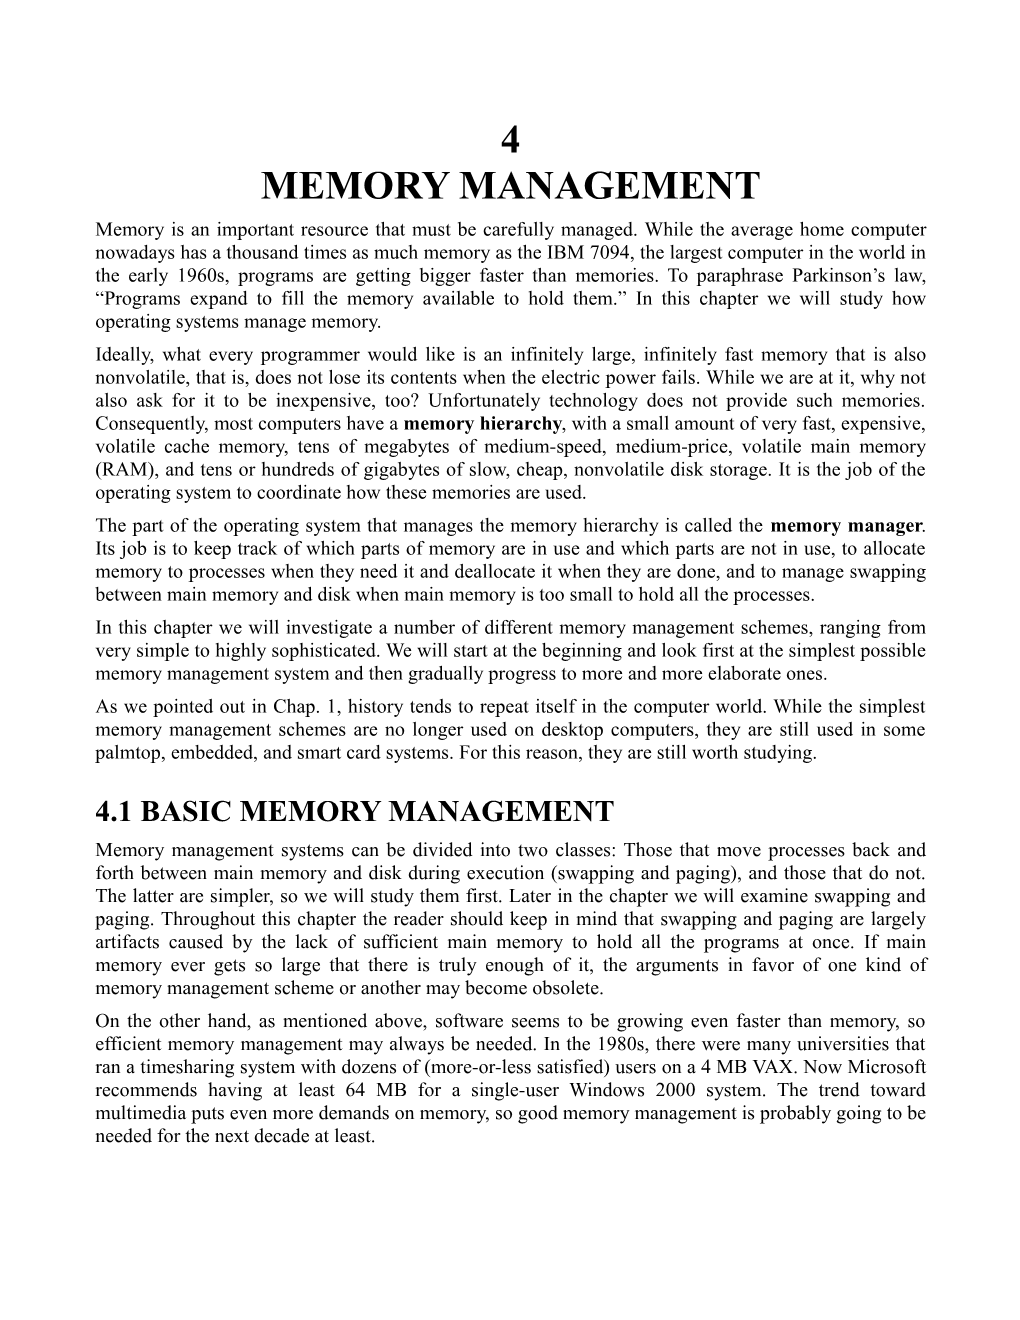 4 MEMORY MANAGEMENT Memory Is an Important Resource That Must Be Carefully Managed